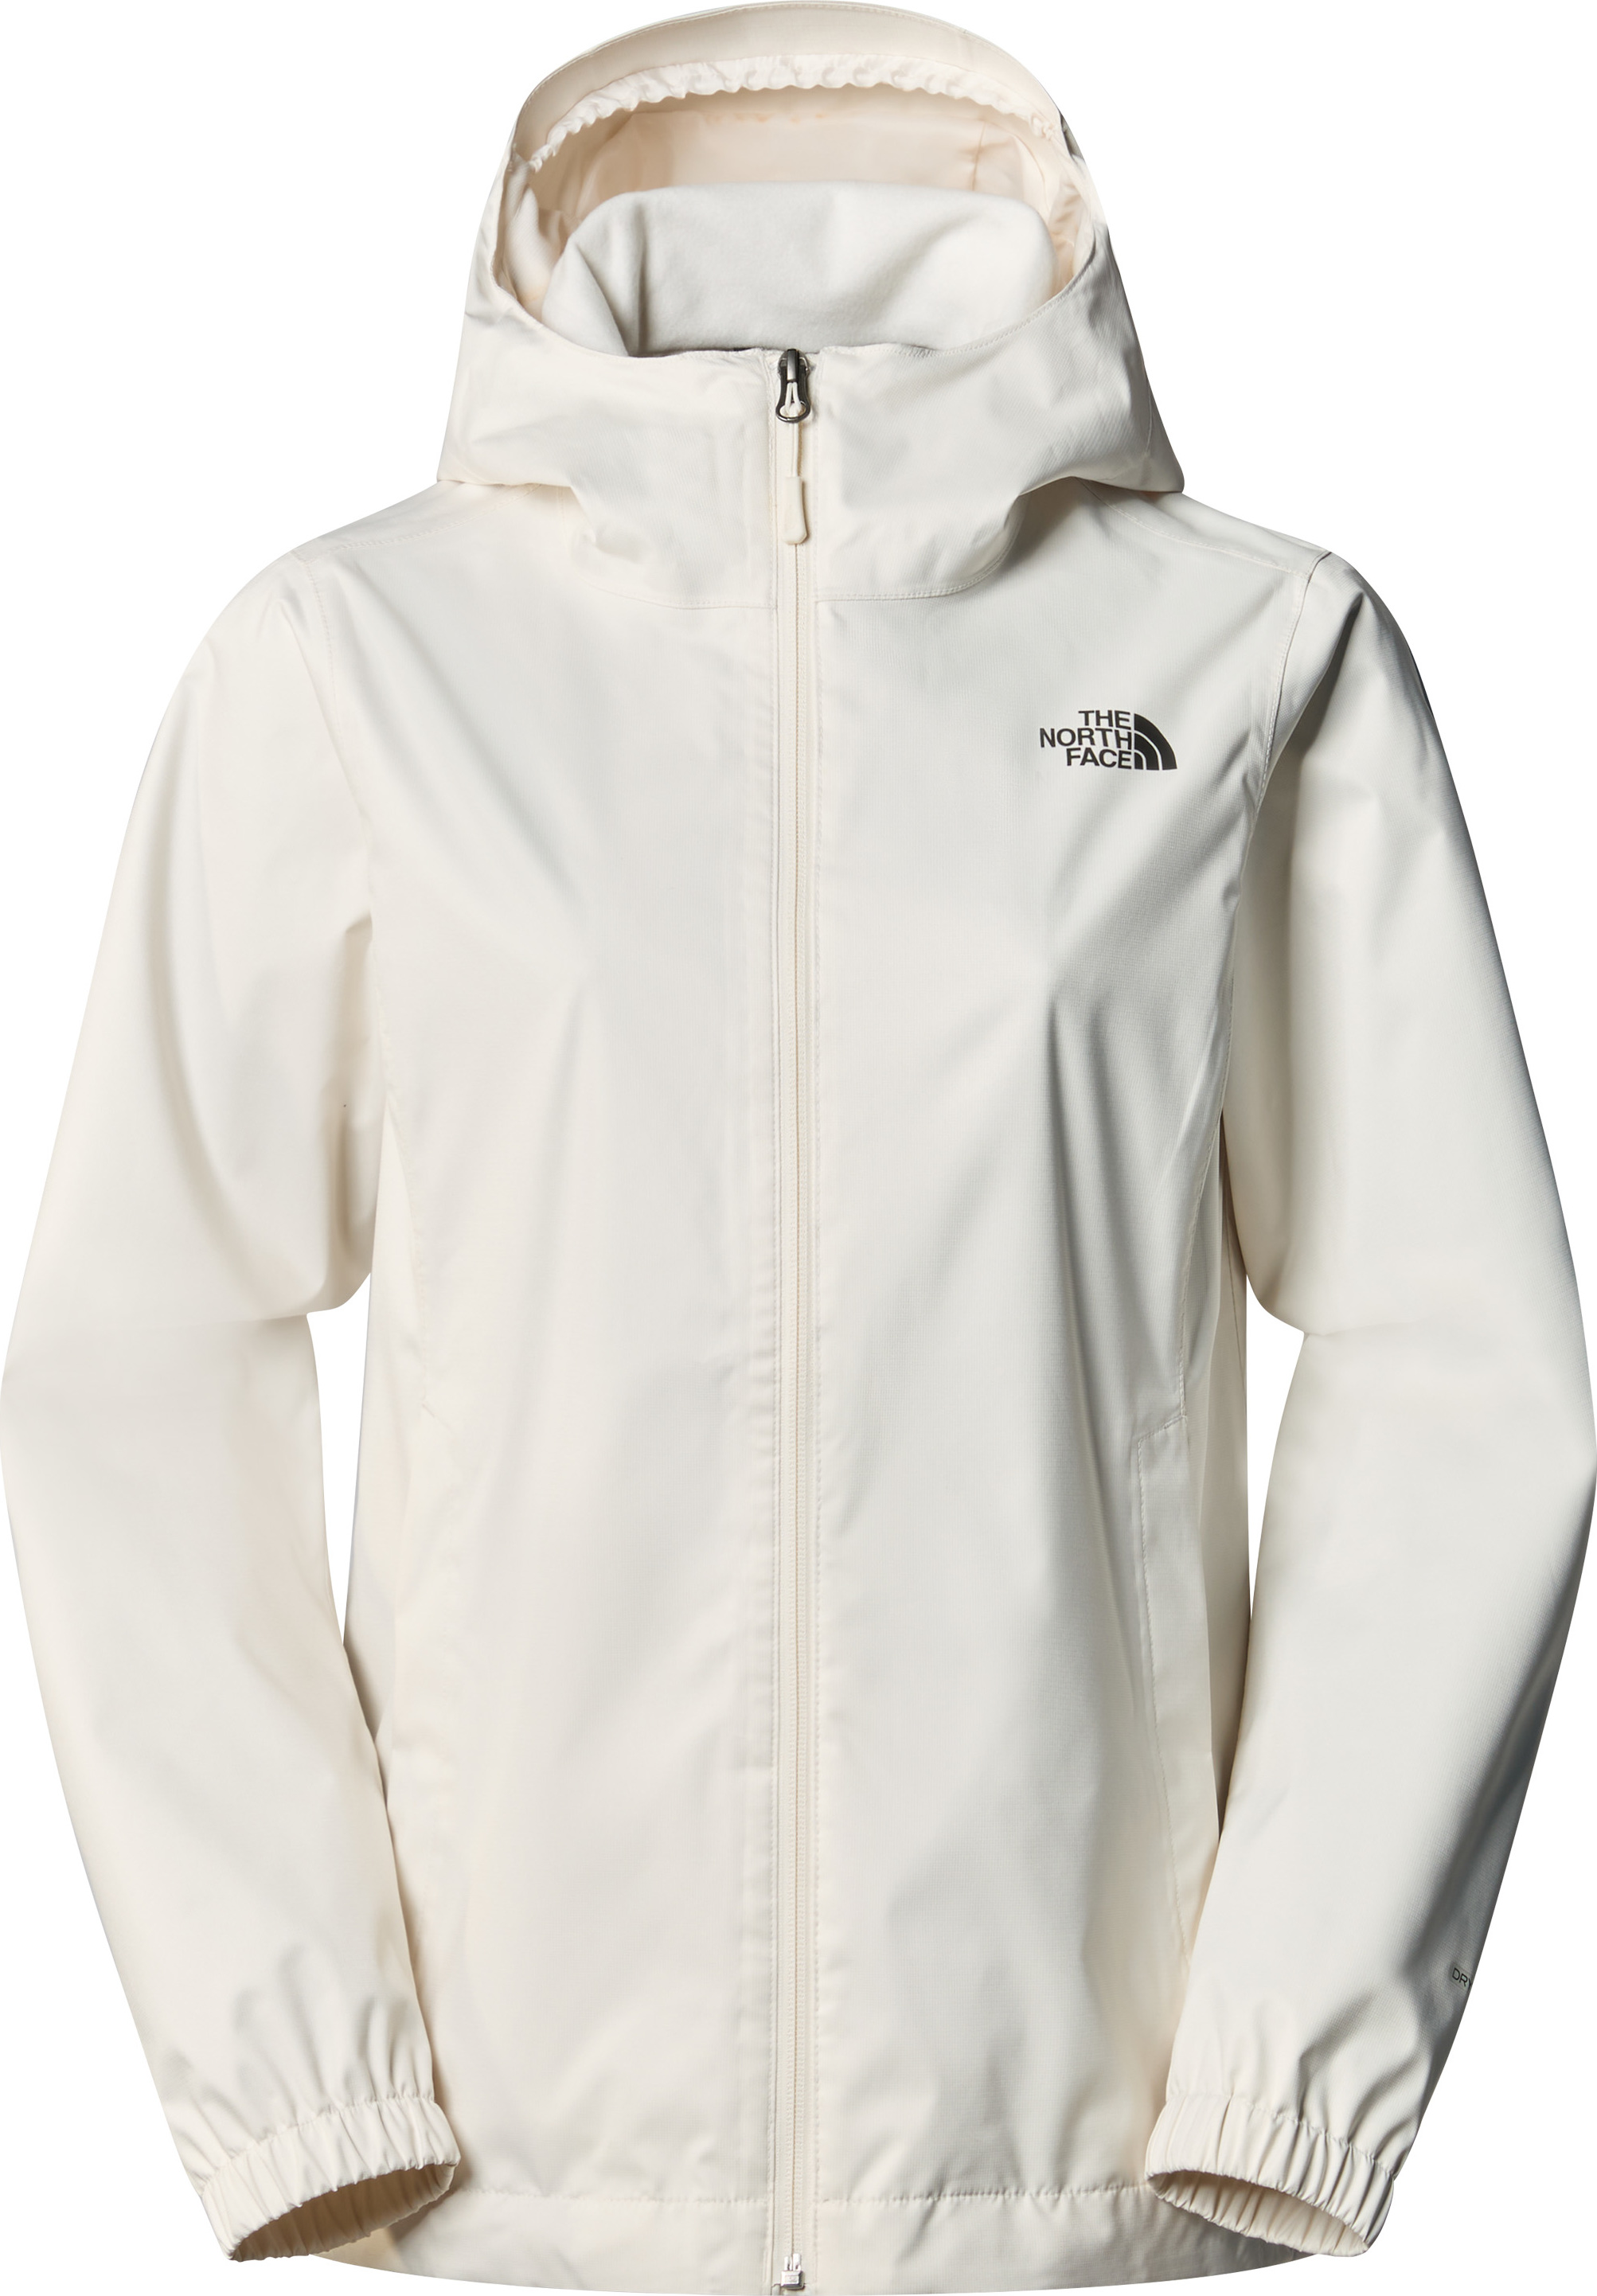 The North Face Women’s Quest Jacket White Dune